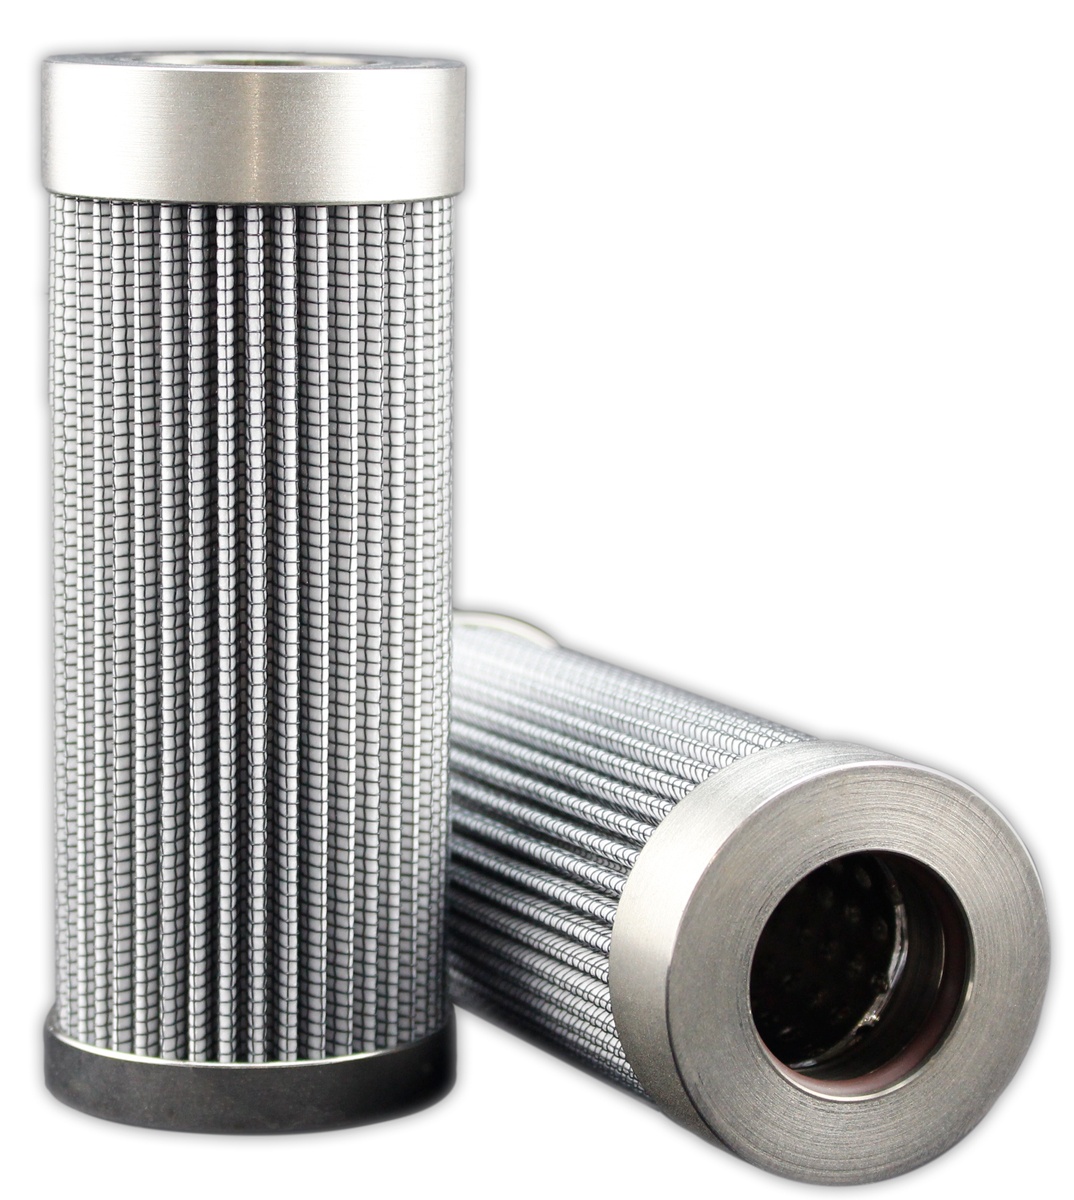 Interchange Hydraulic Filter, Glass, 10 Micron Rating, Viton Seal, 4.48 Inch Height